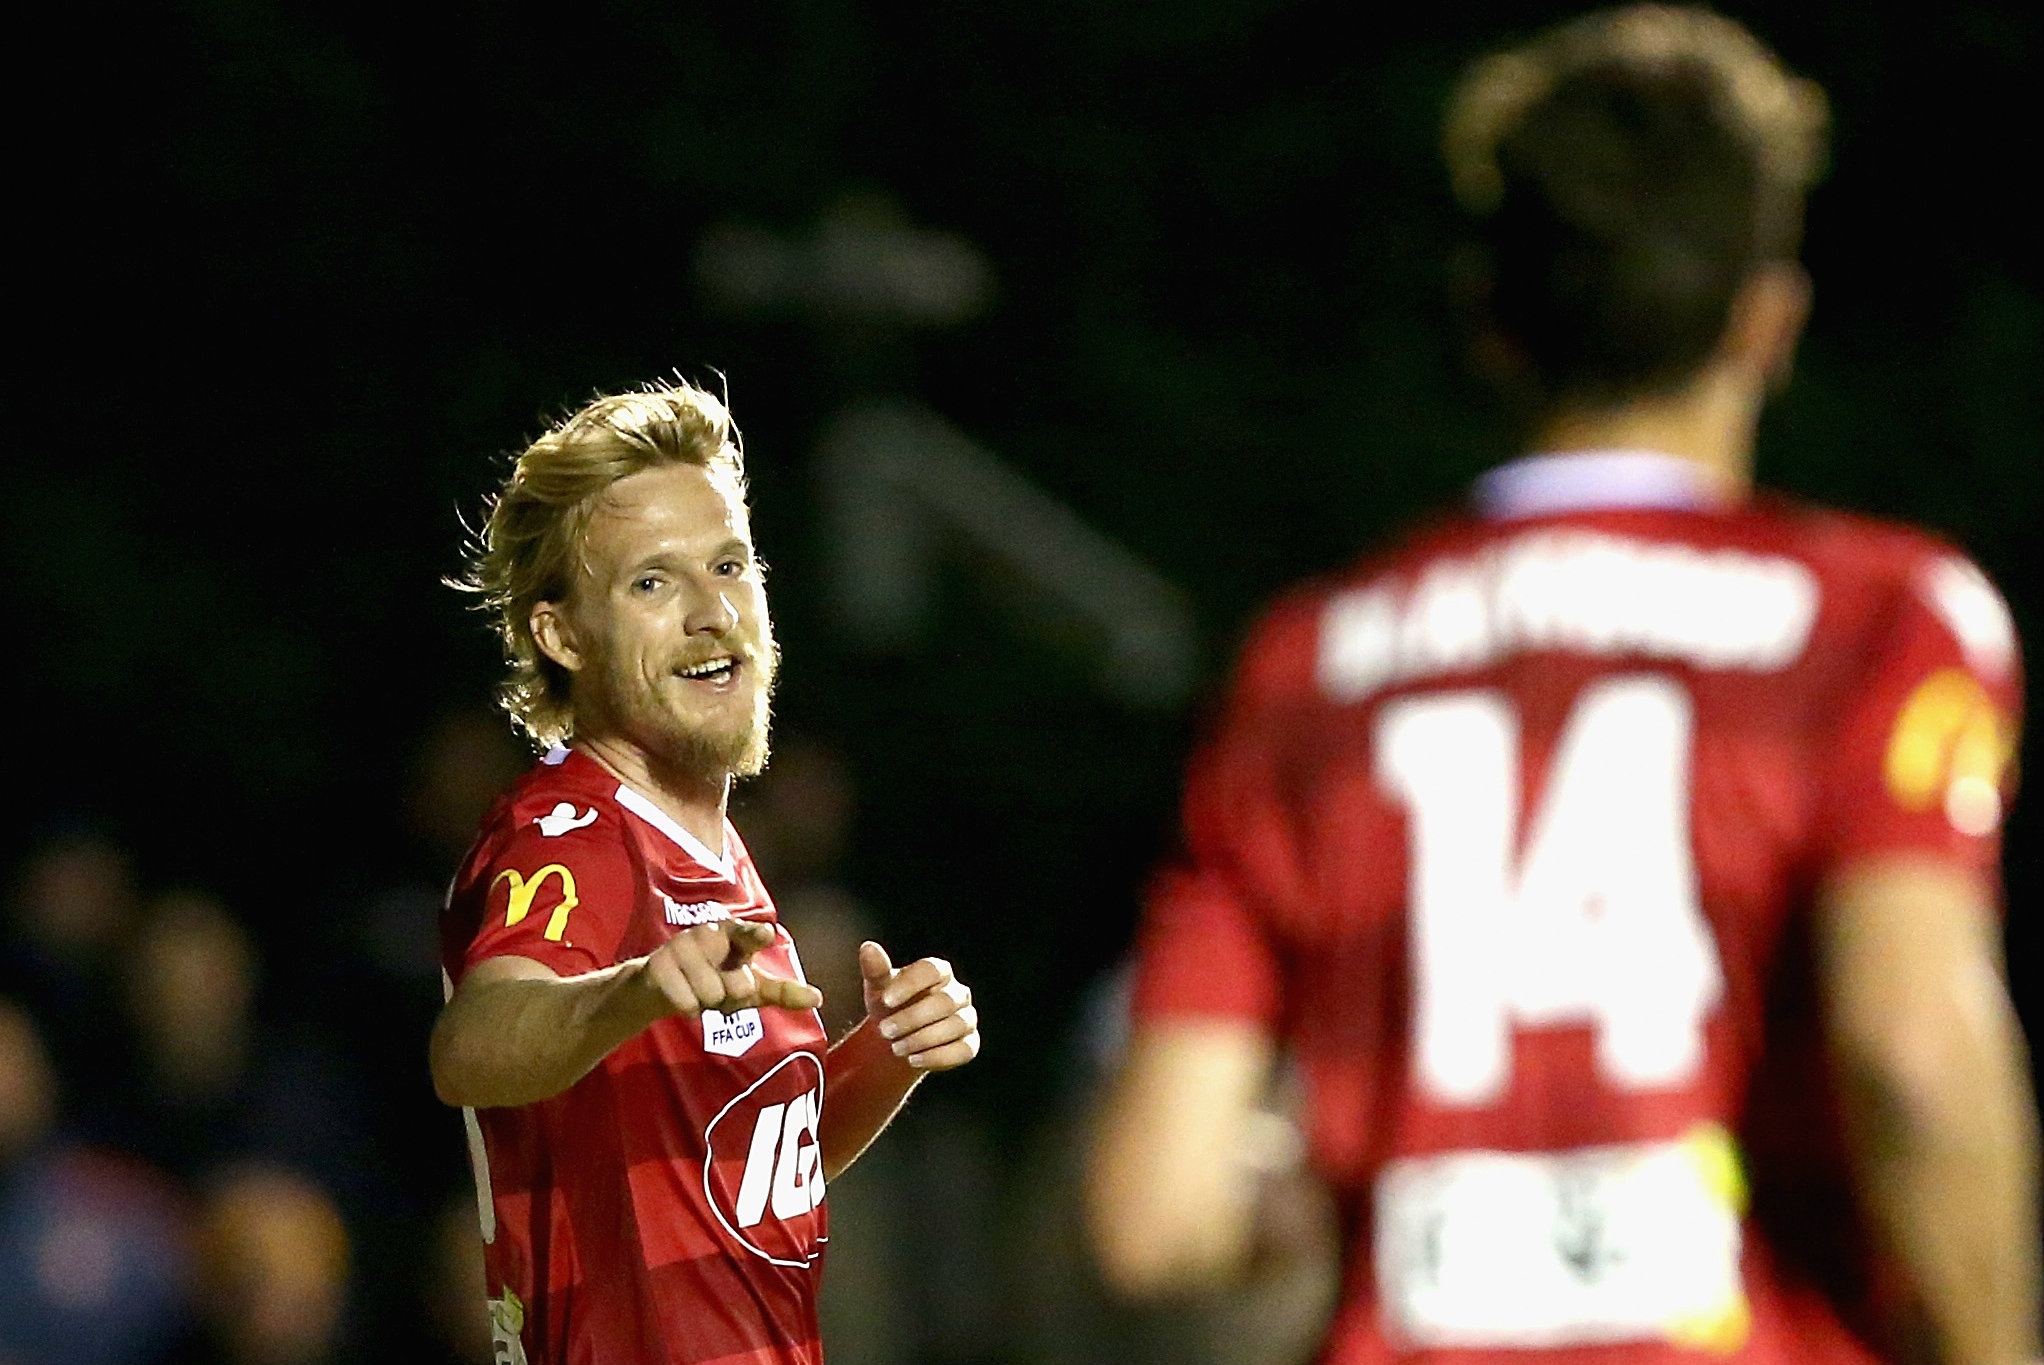 Ben Halloran after scoring the opening goal for Adelaide United.